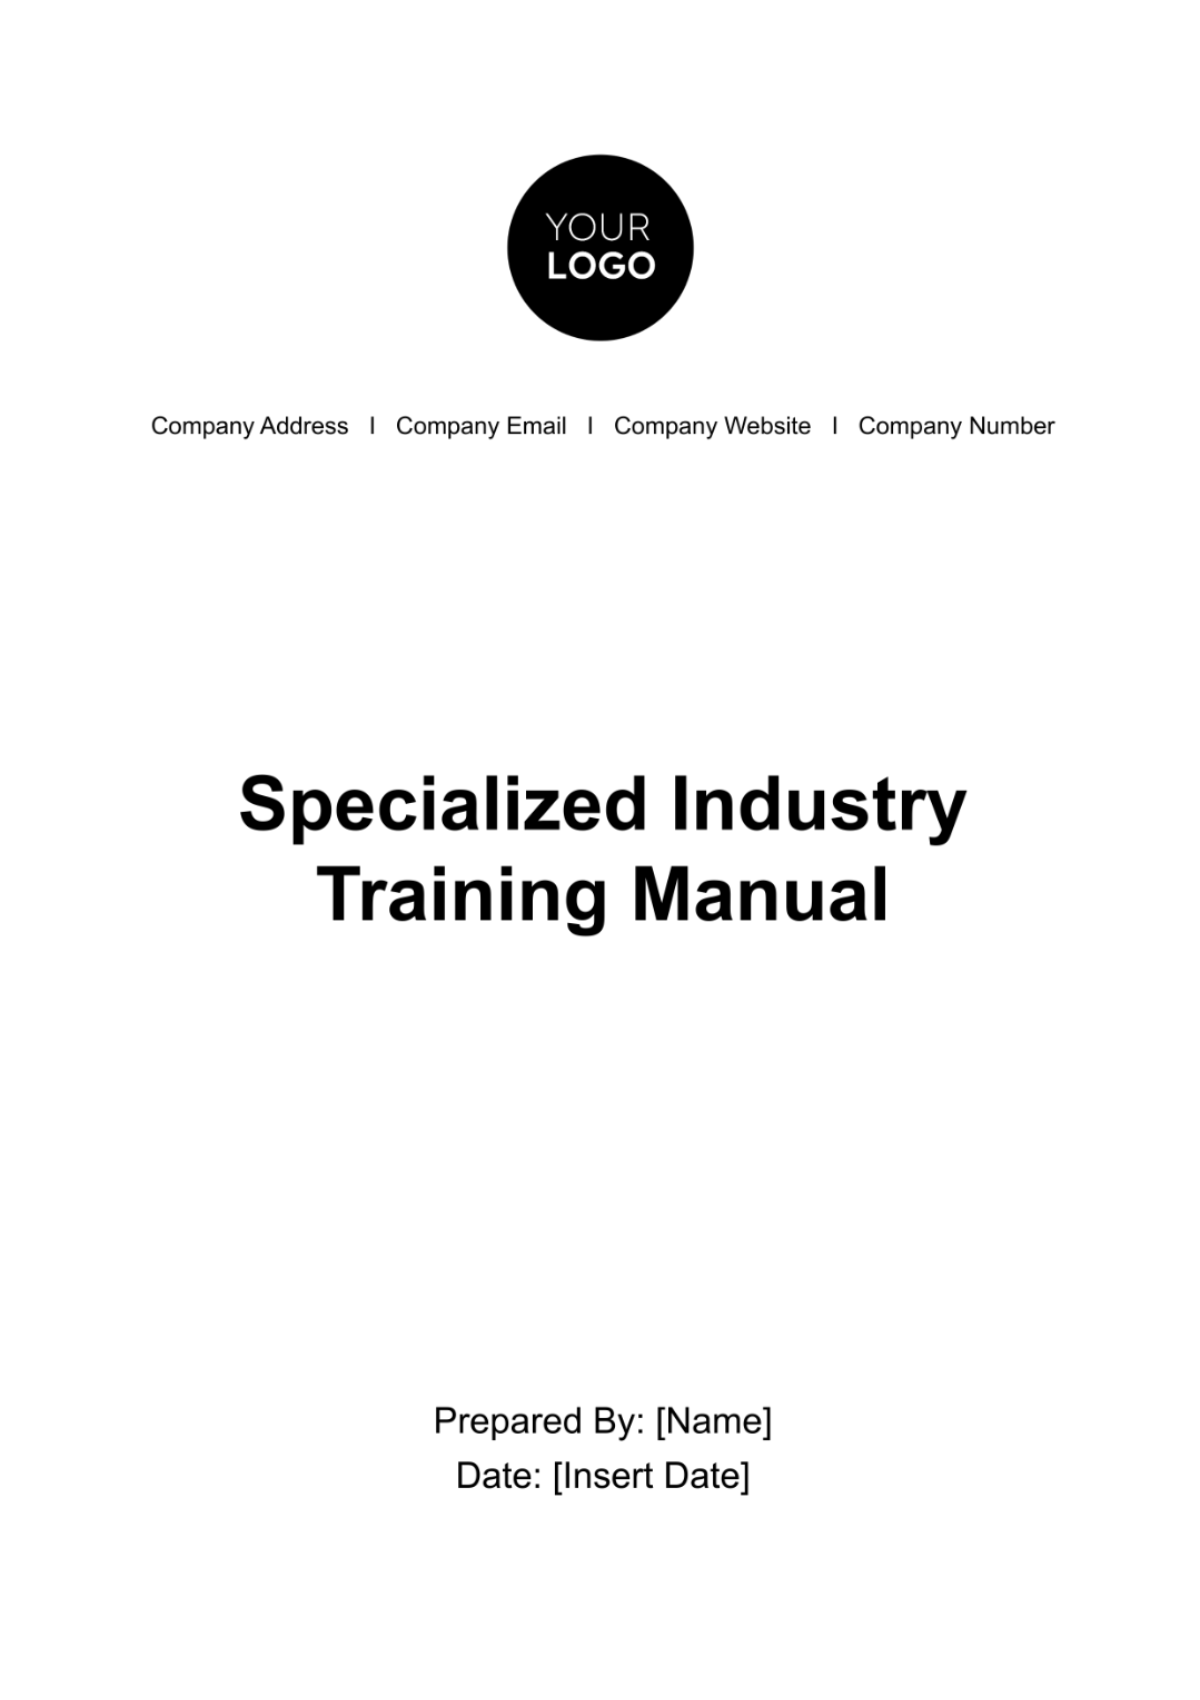 Free Specialized Industry Training Manual HR Template